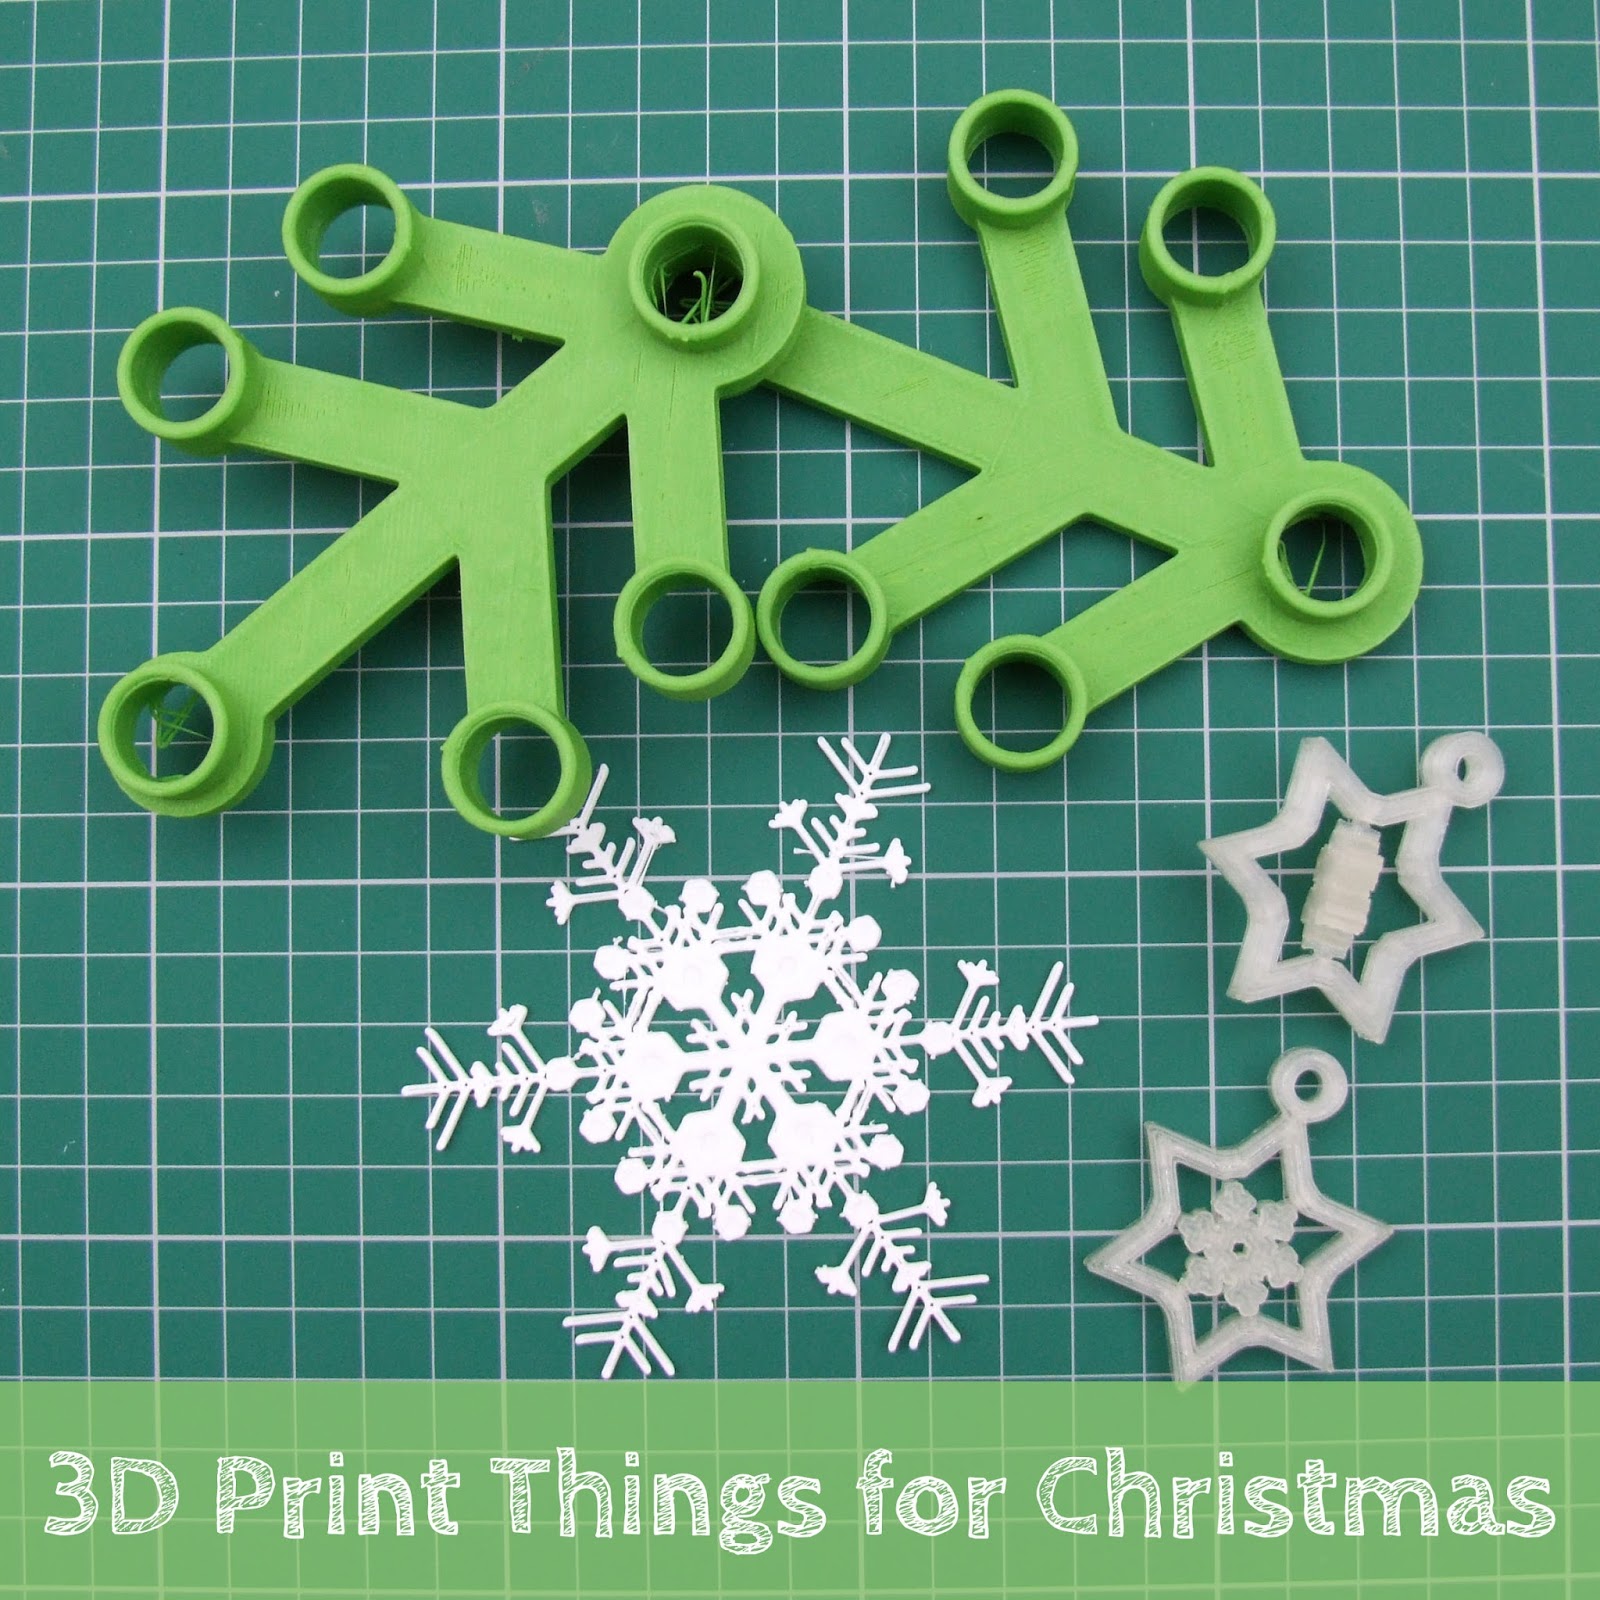 fun-christmas-things-to-3d-print-for-kids-and-teen-tech-age-kids